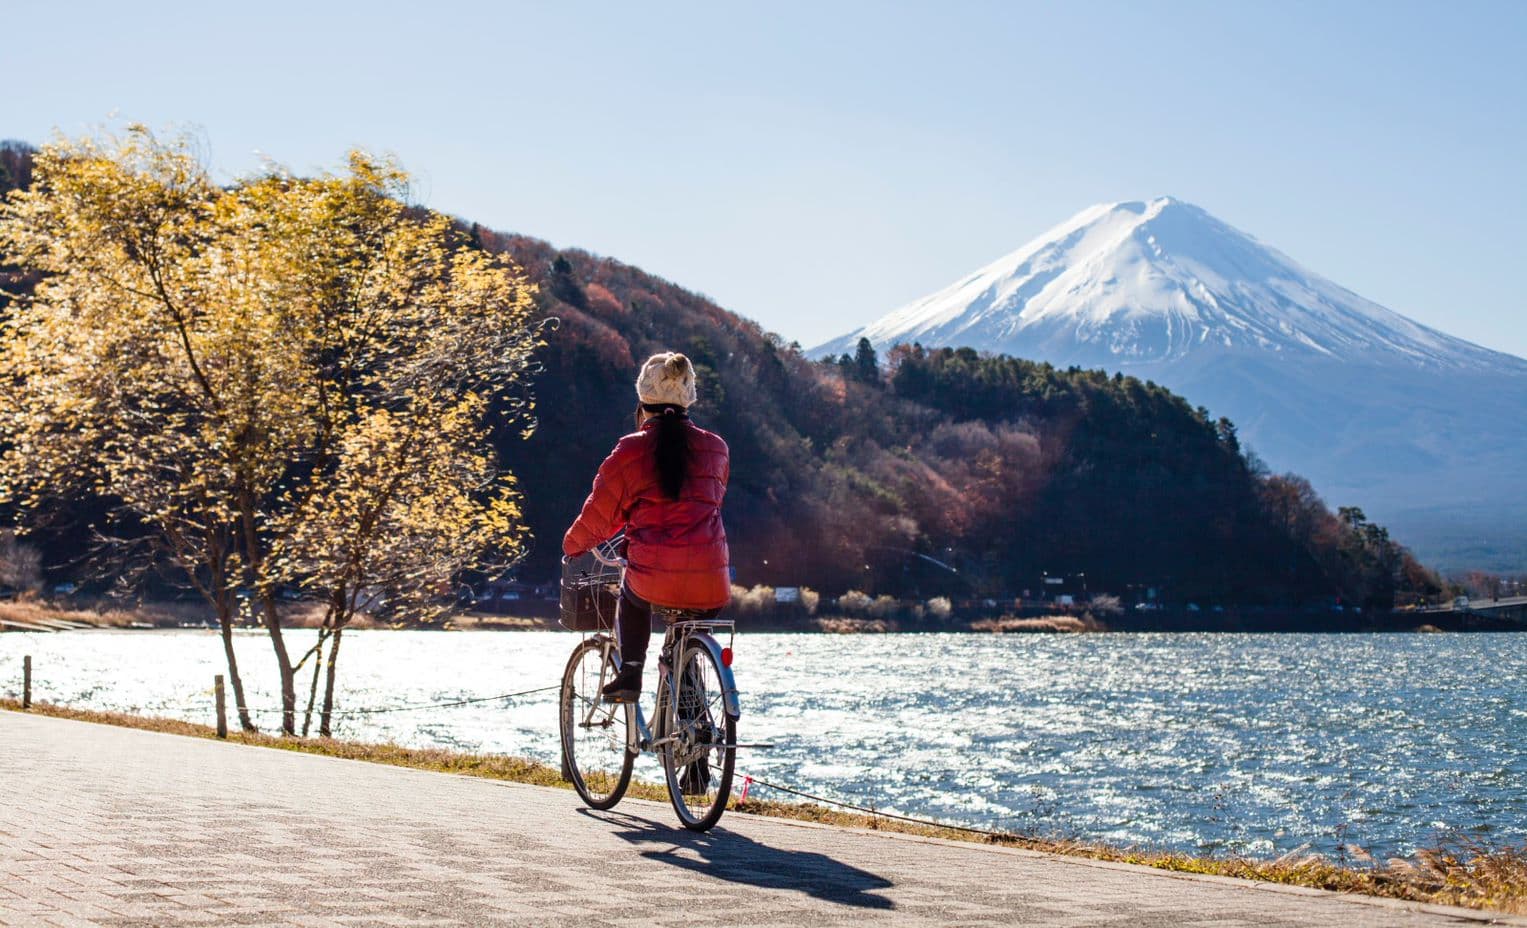 Girl riding her bicycle by Mt. Fuji in Japan